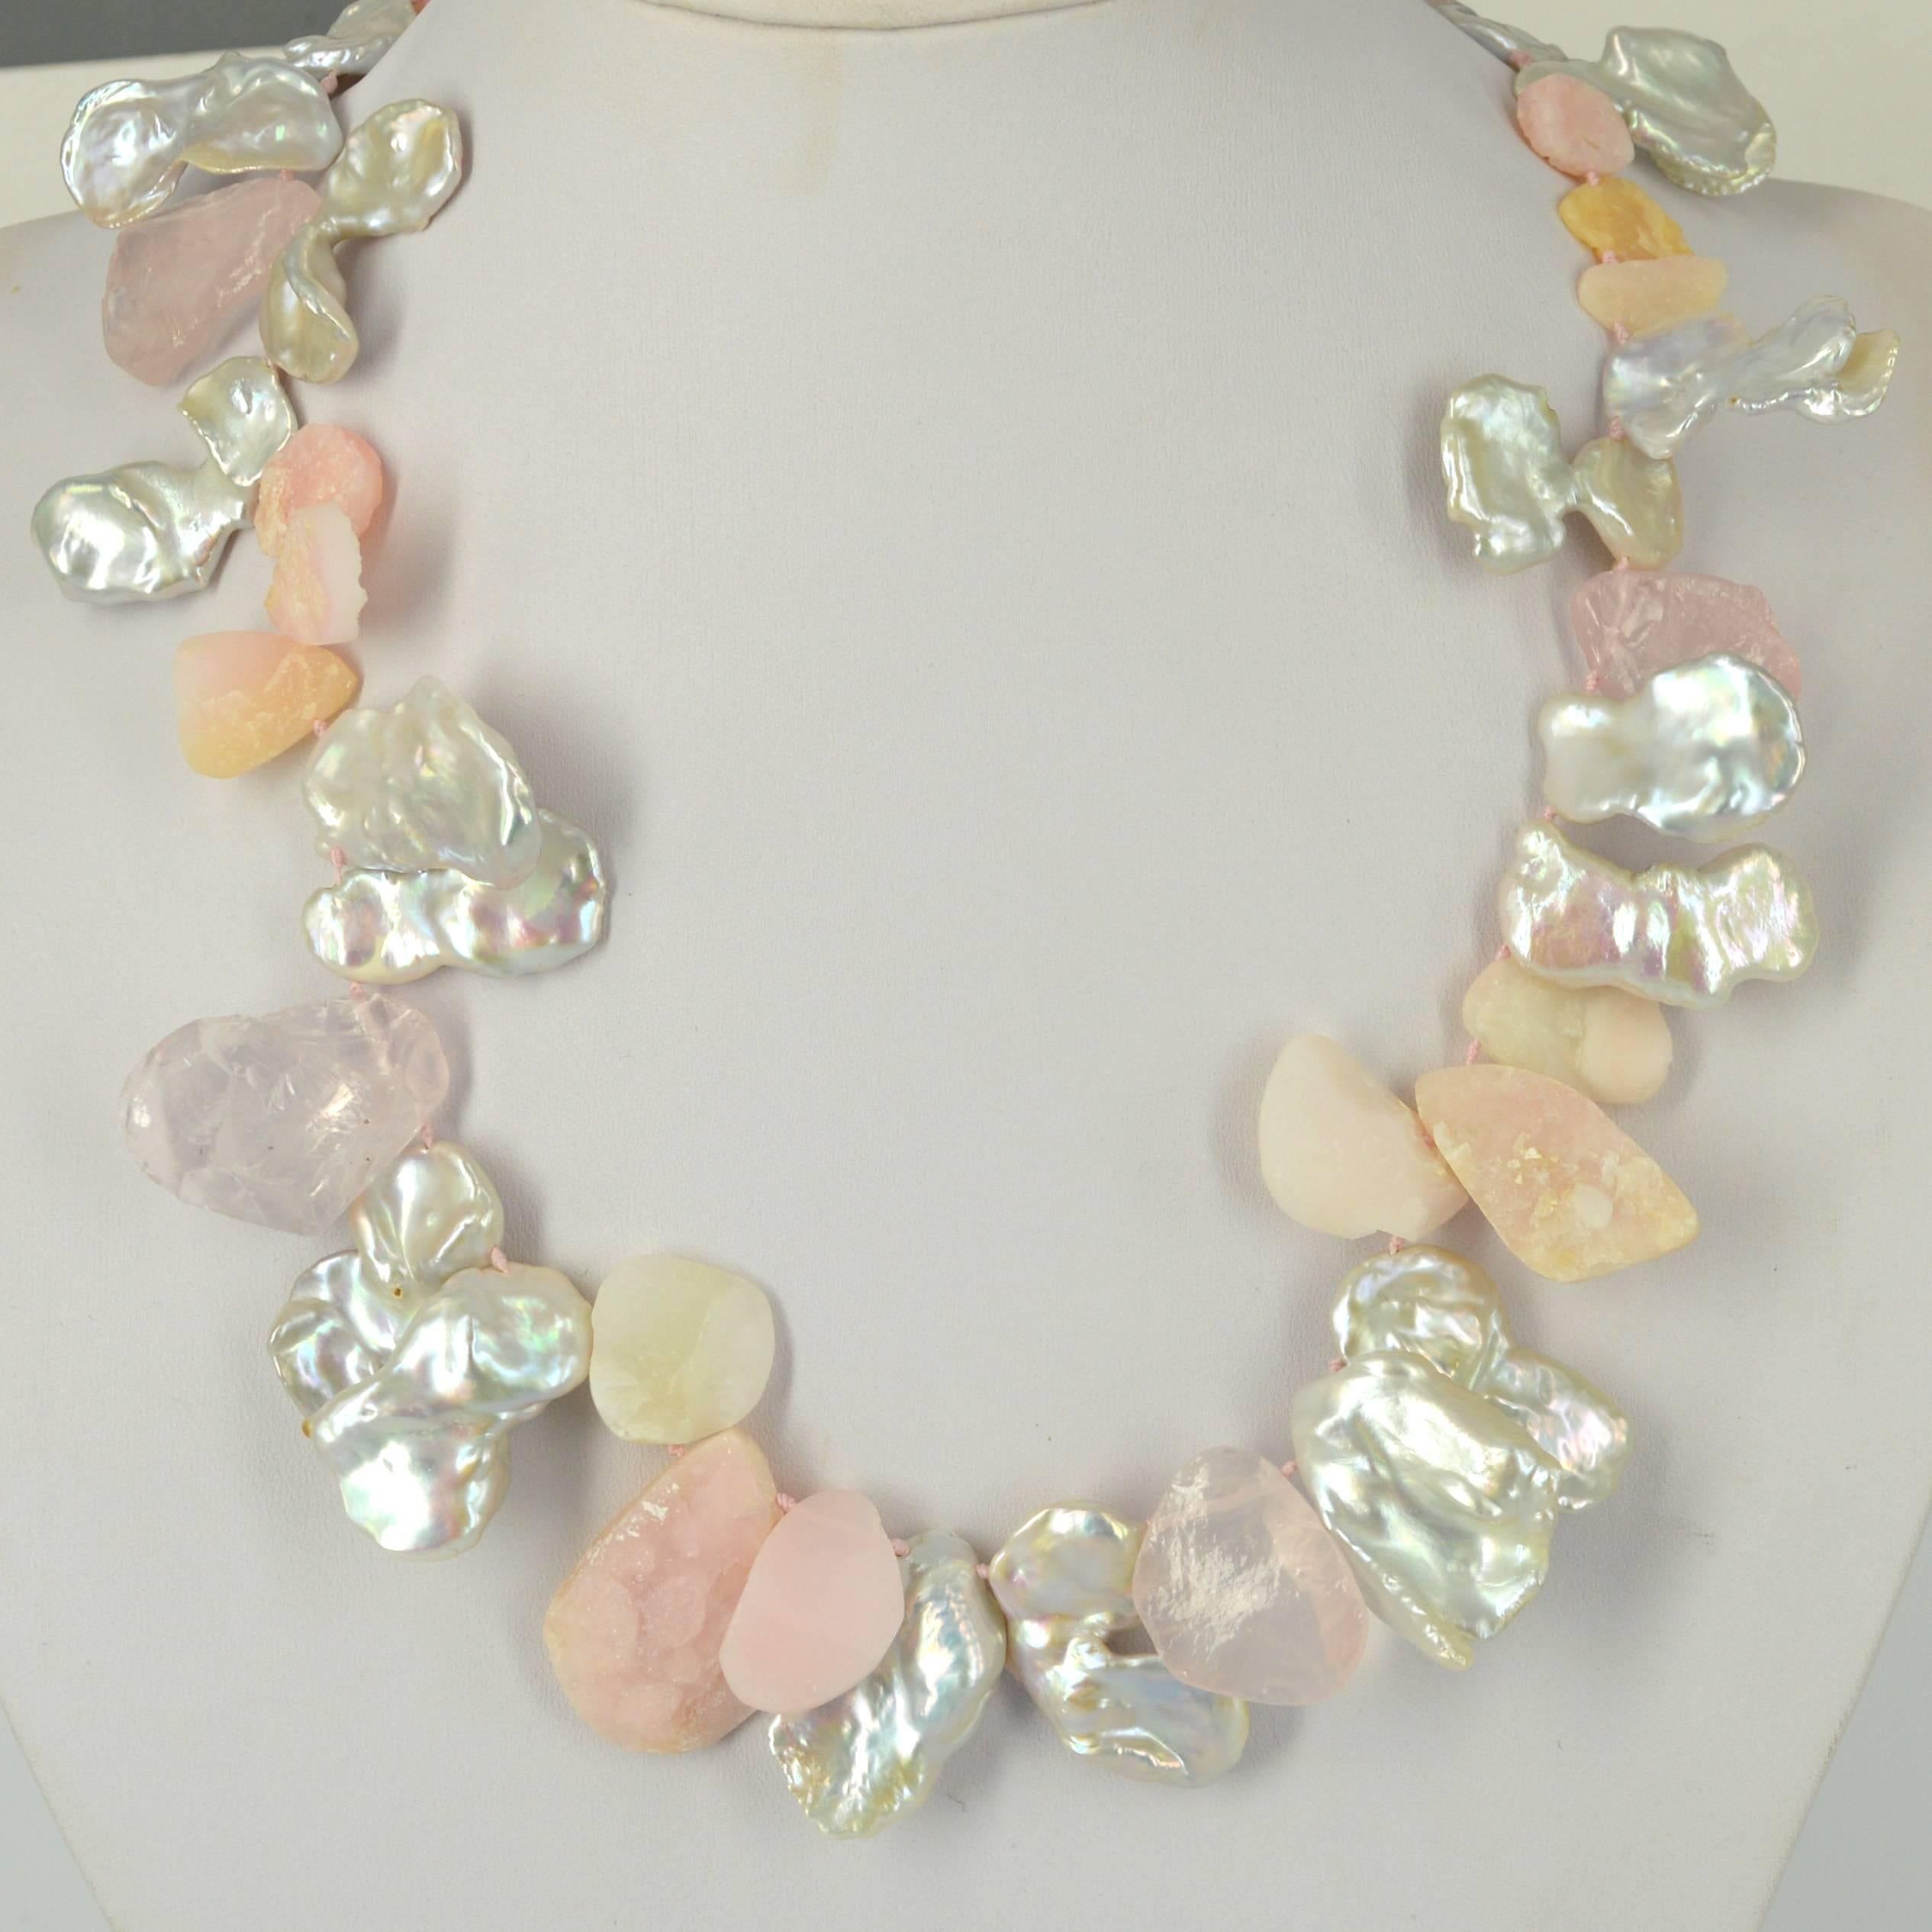 Statement necklace of large Fresh Water Keshi Pearls approx 30mm with Raw top drilled teardrop beads in Rose Quartz and Pink Opal  hand knotted on matching pink thread with a 51mm hook Sterling Silver clasp. 

Finished necklace measures